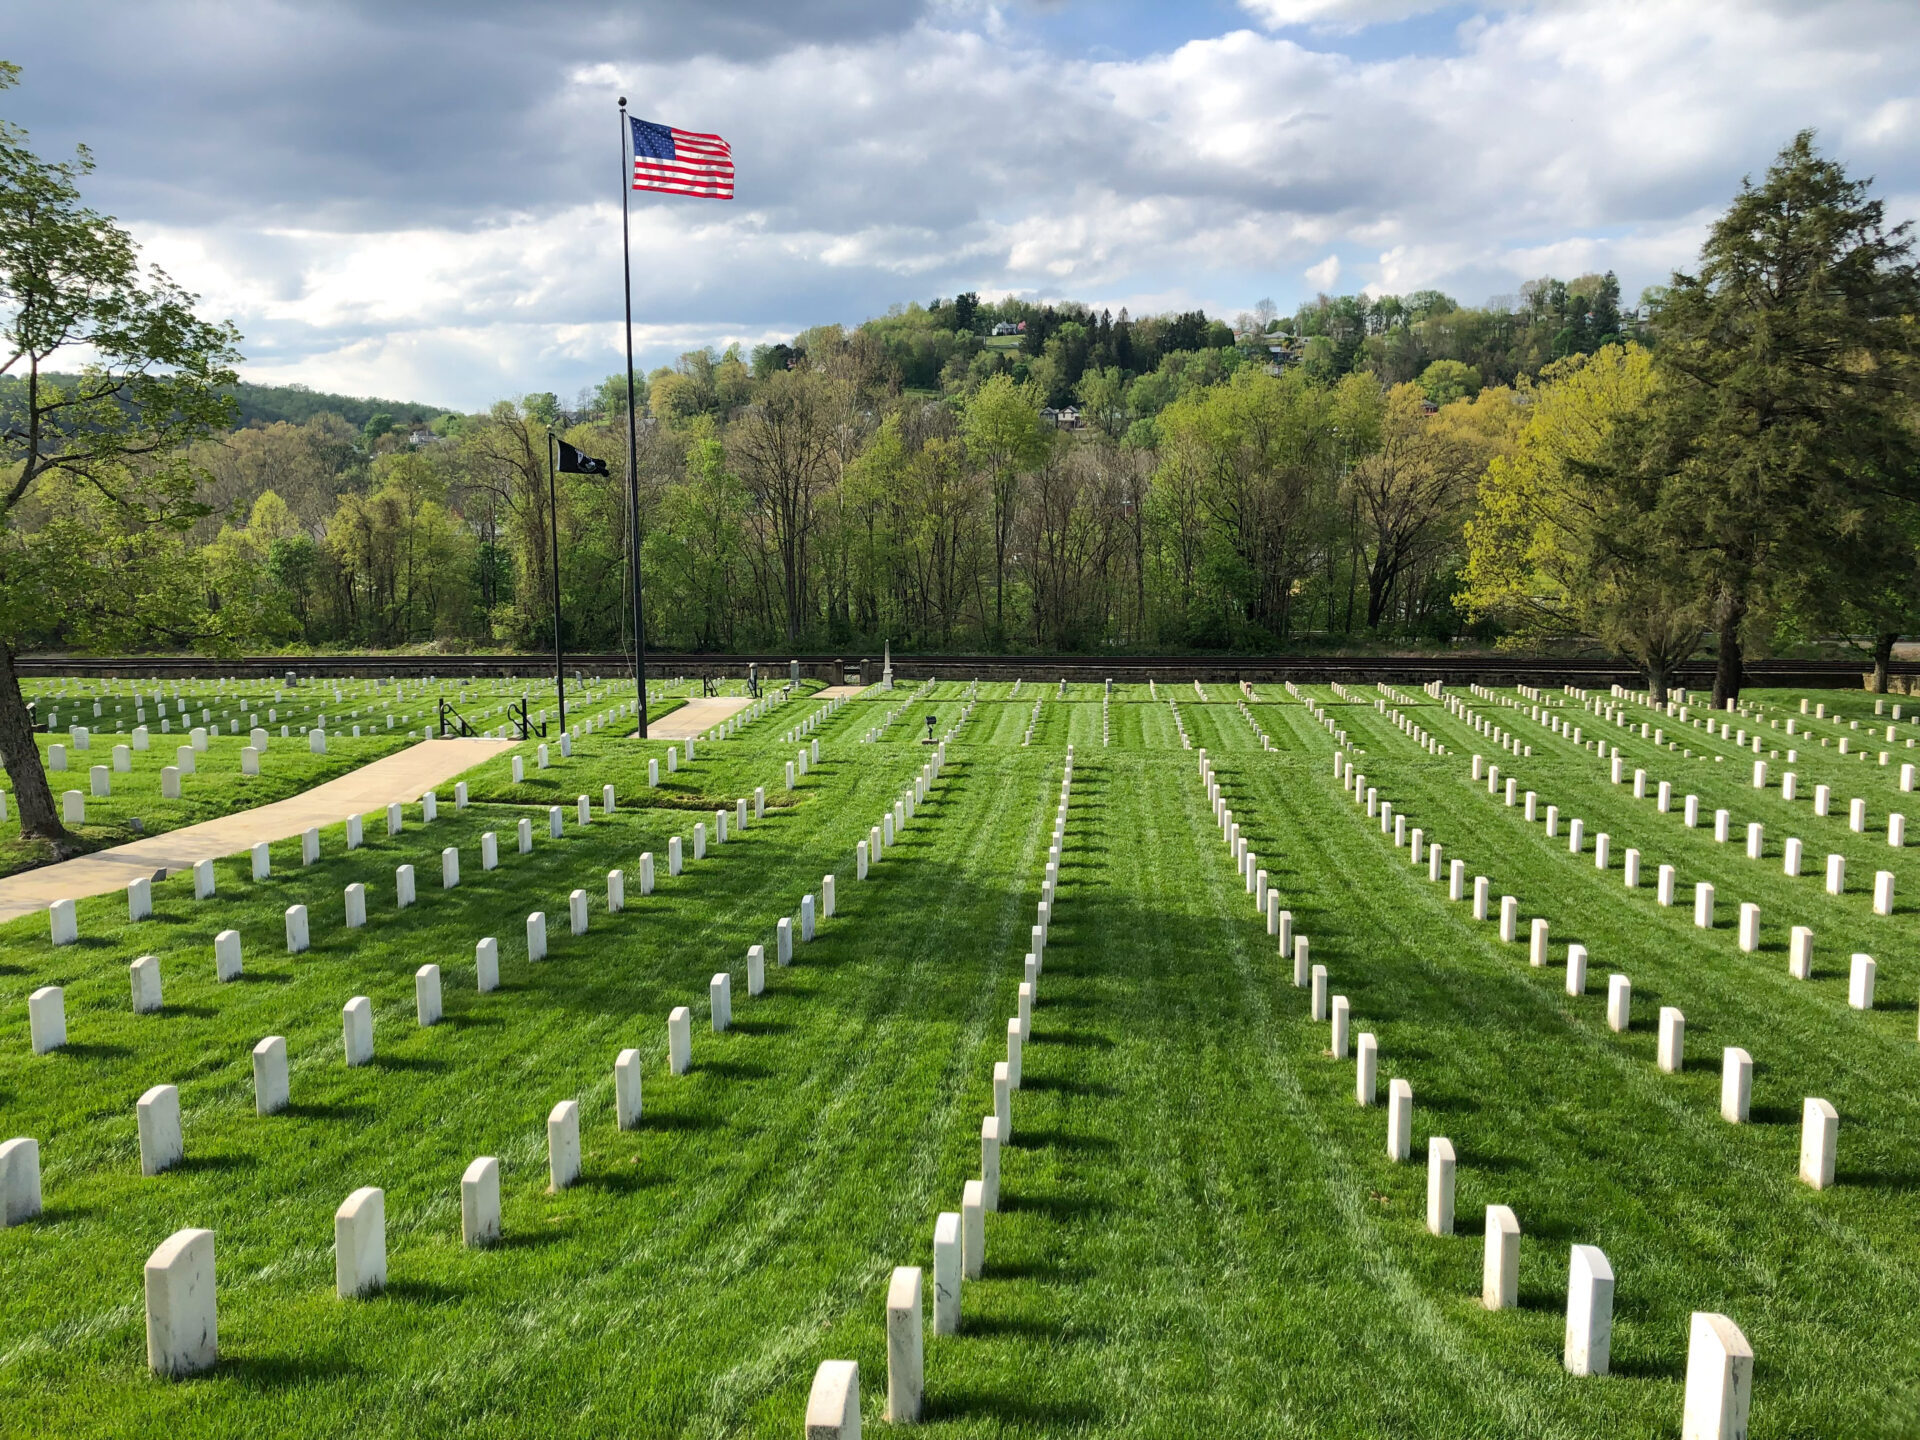 Cemeteries Project Revives The Stories Of W.Va. Veterans